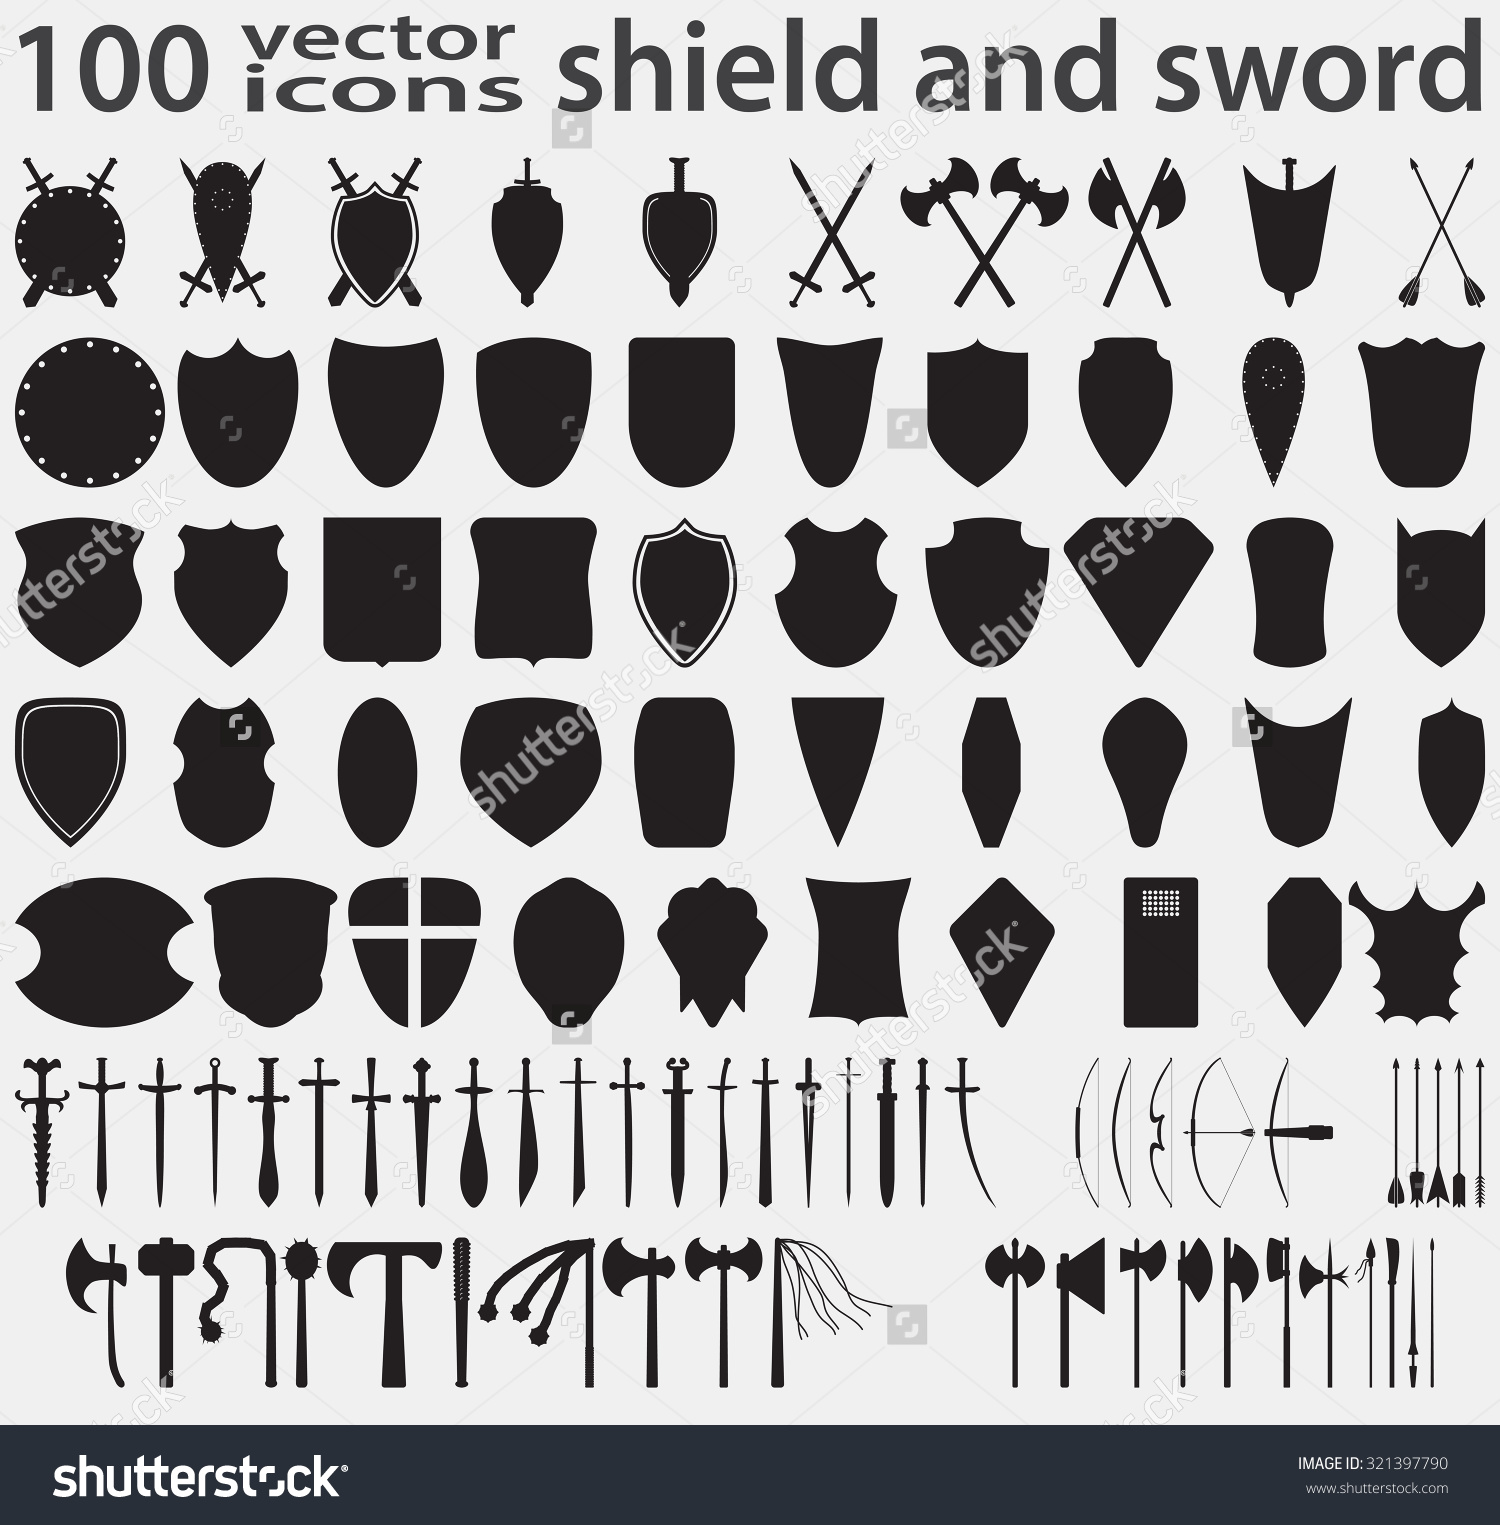 bow clipart medieval